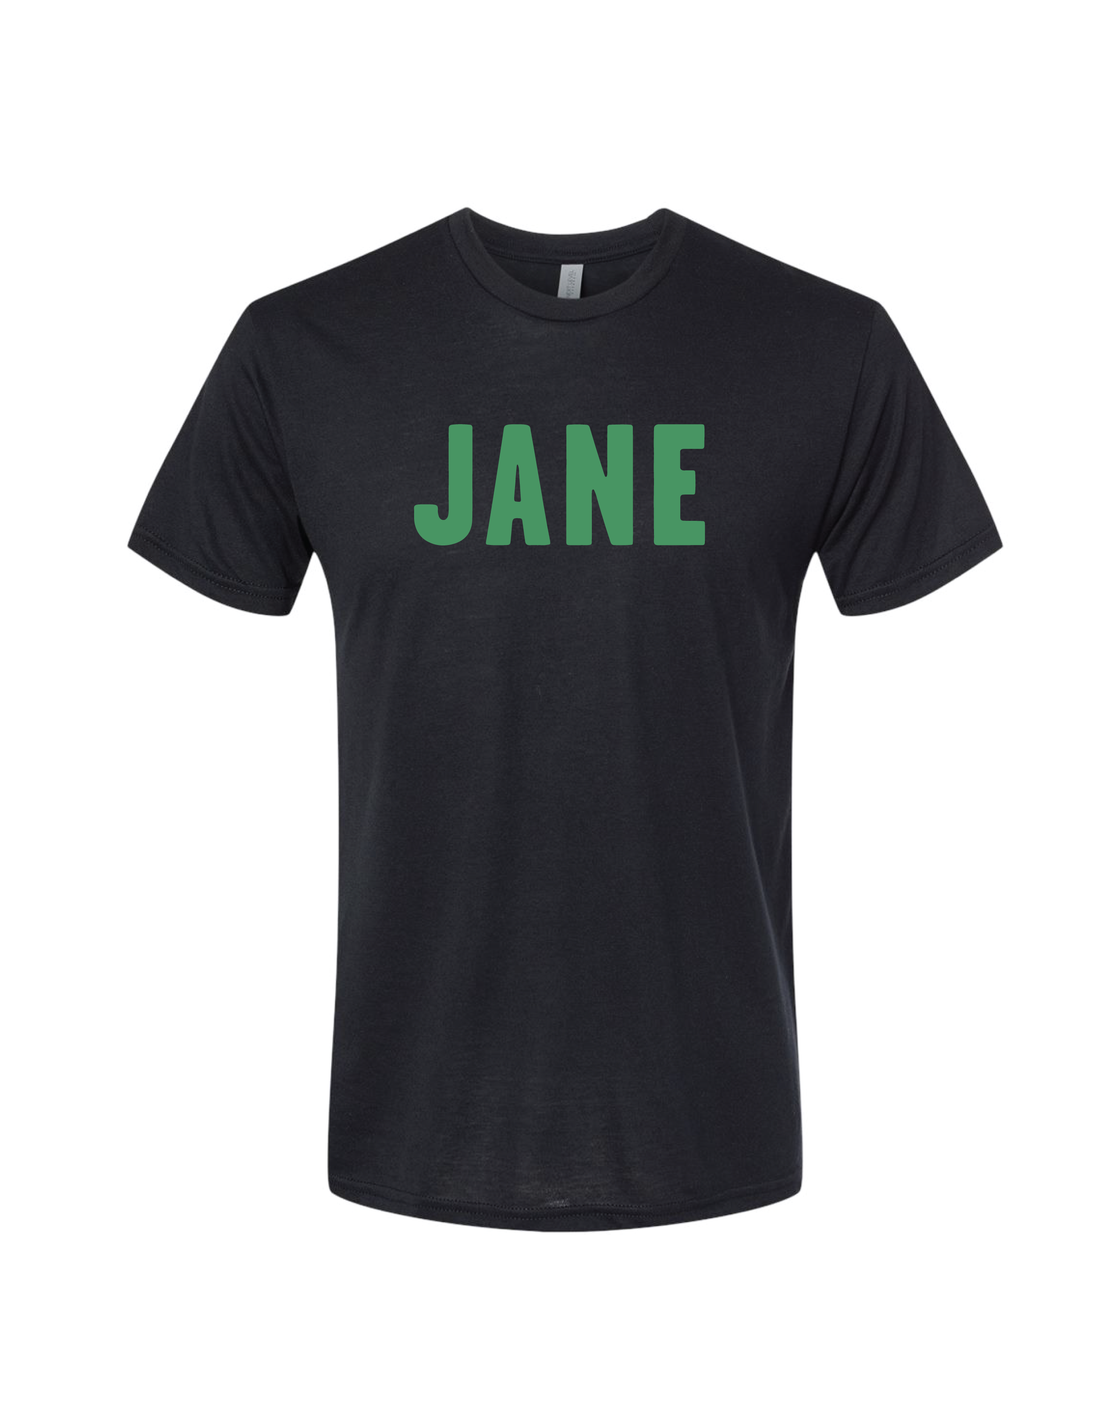 Unisex JANE Crew Neck T-Shirt in Black with Green Letters